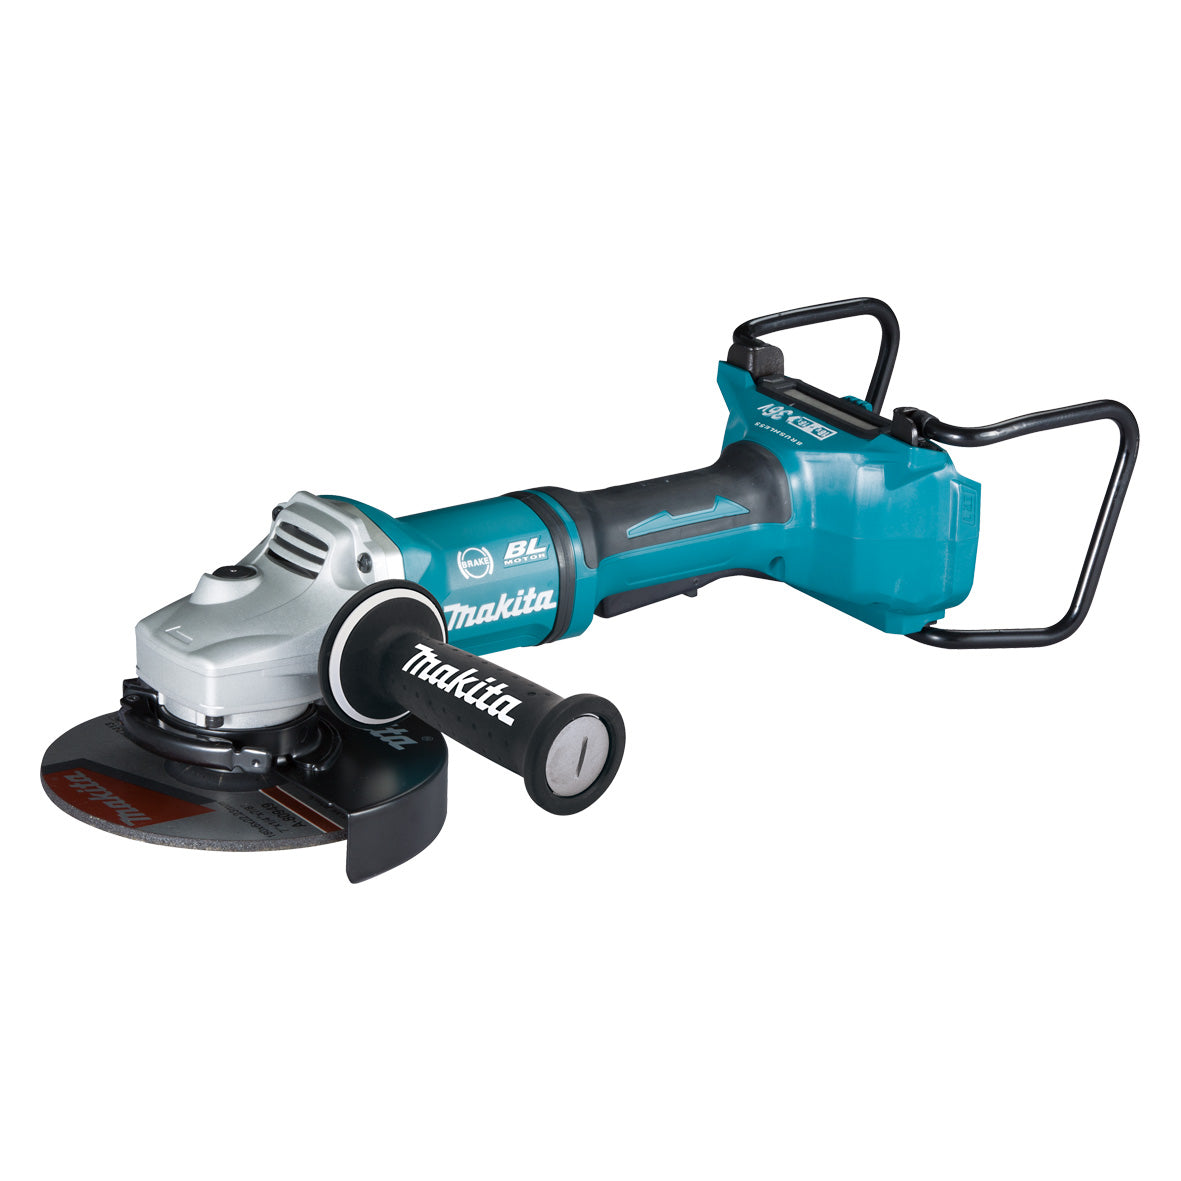 18Vx2 180mm (7") Brushless Angle Grinder Bare (Tool Only) DGA700Z01K by Makita